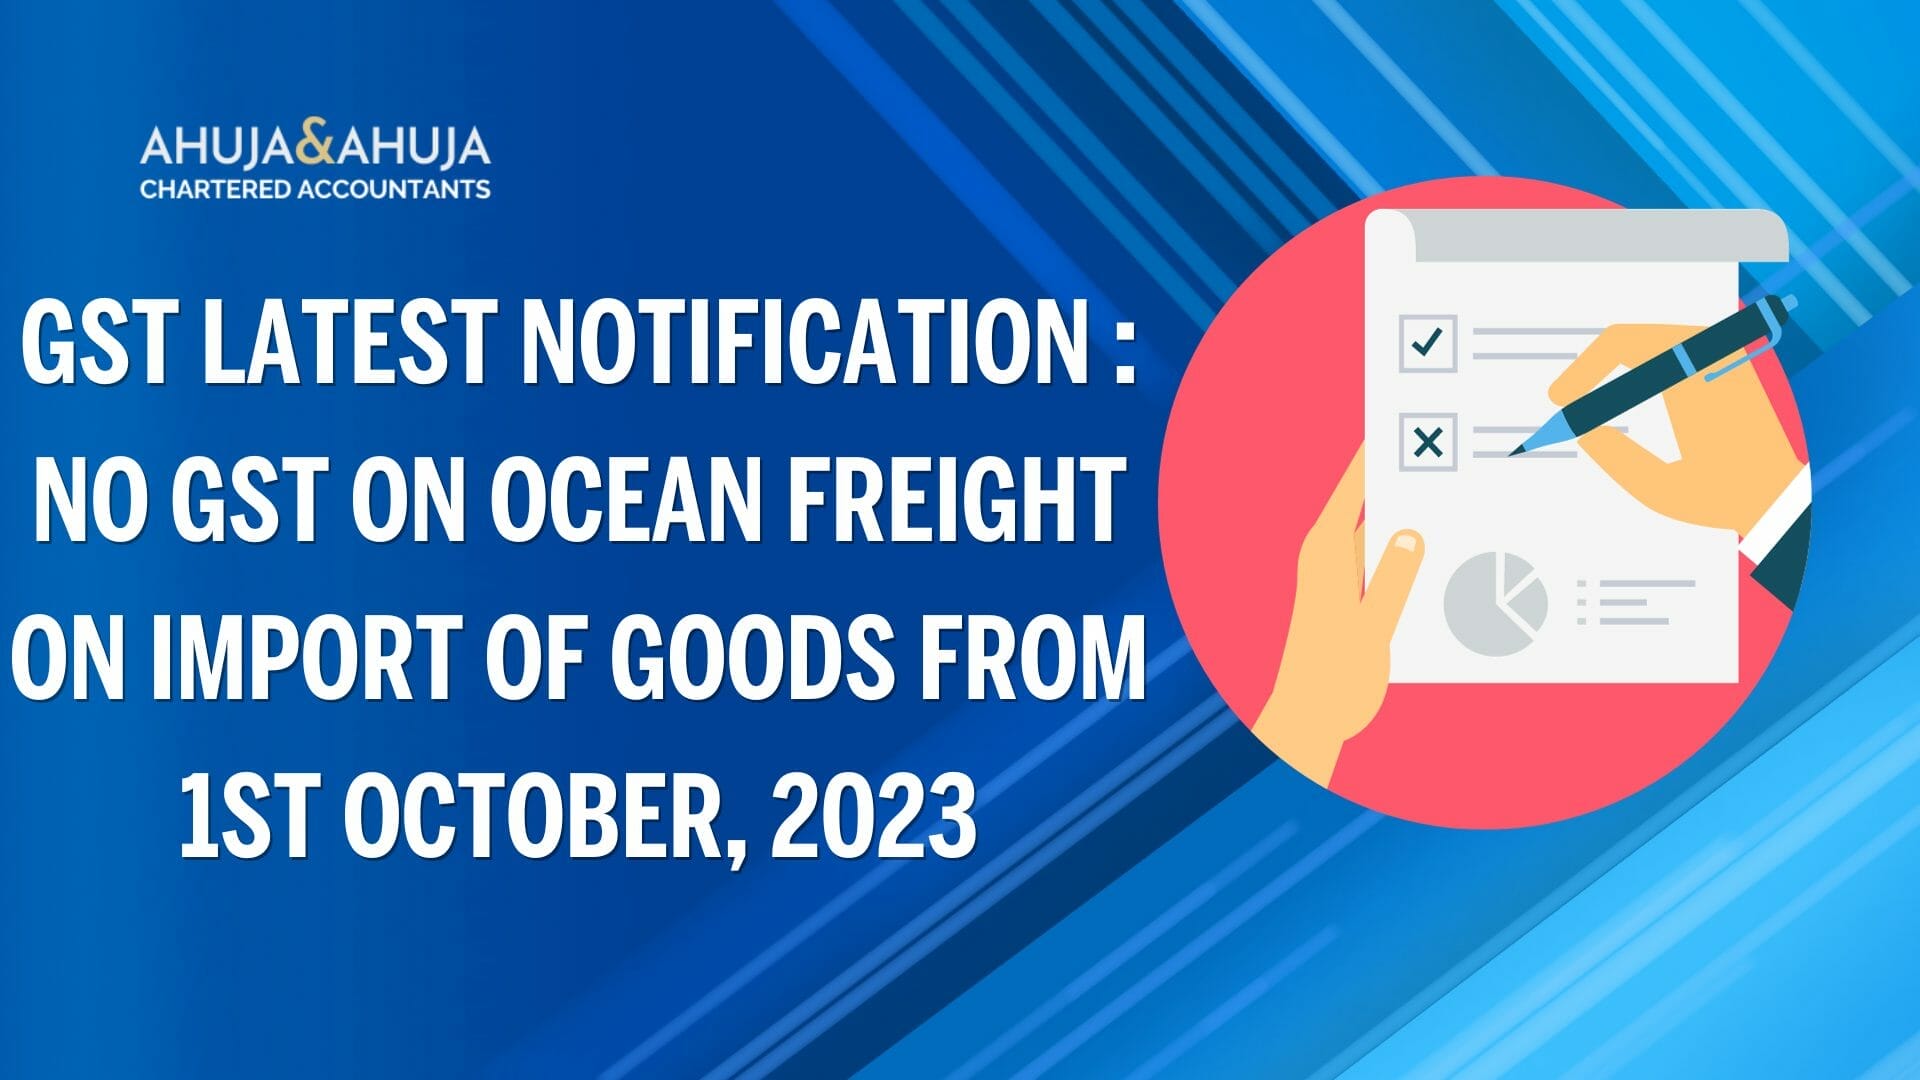 GST Latest Notification No GST on Ocean Freight on Import of Goods from 1st October, 2023